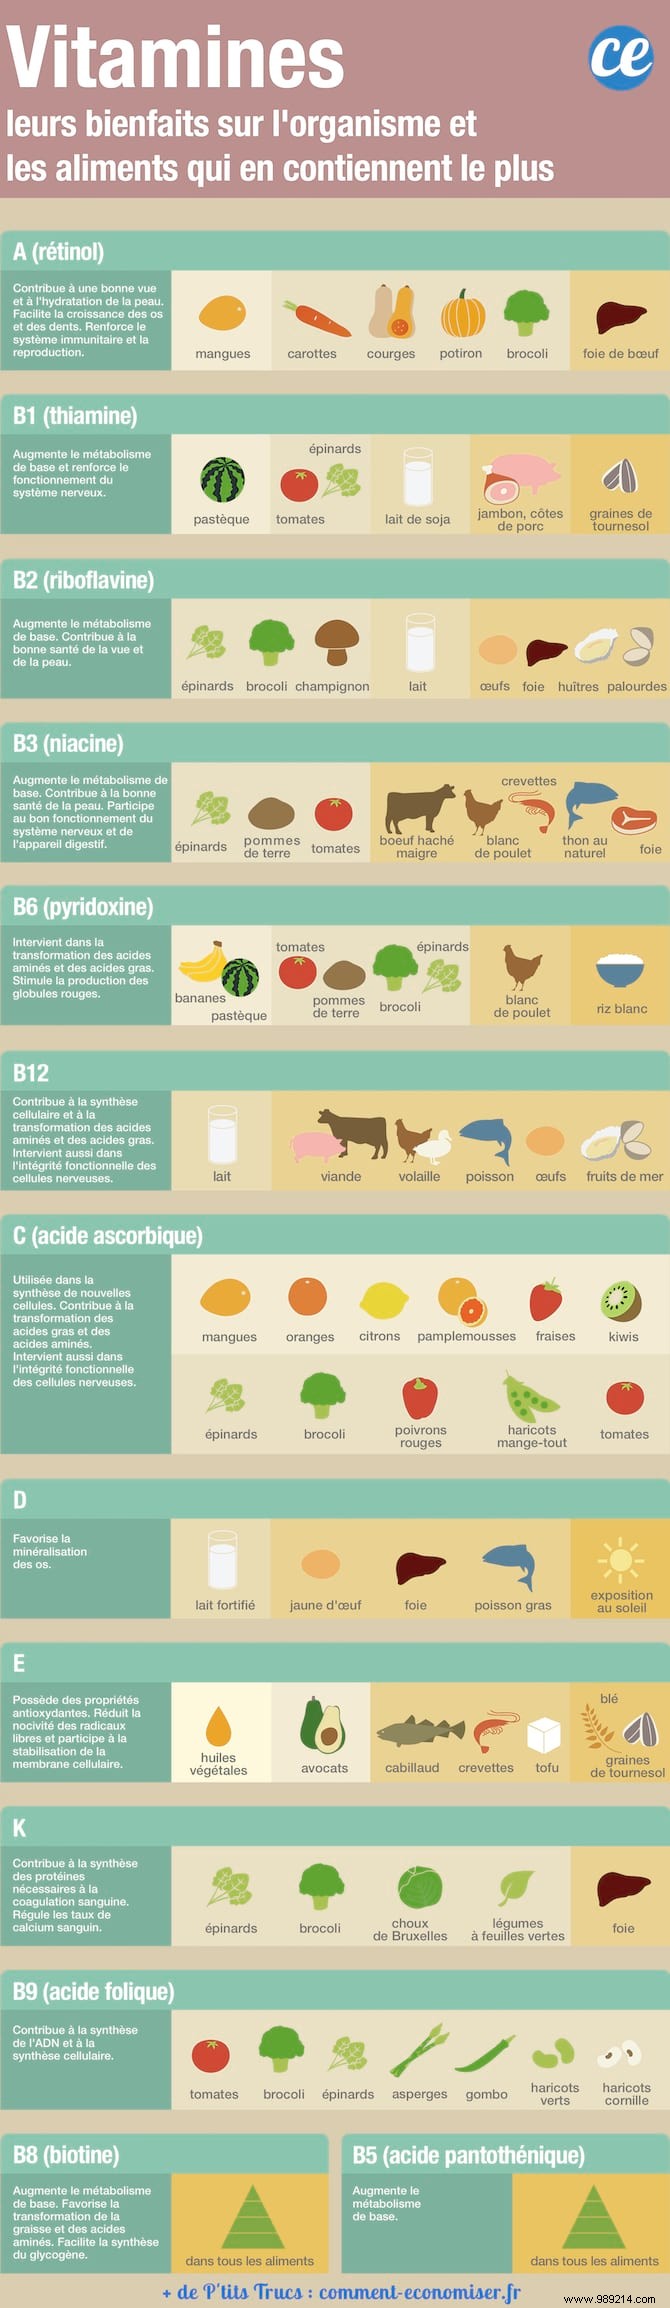 Guide to Vitamins:What Are Their Benefits and Which Foods Have The Most? 